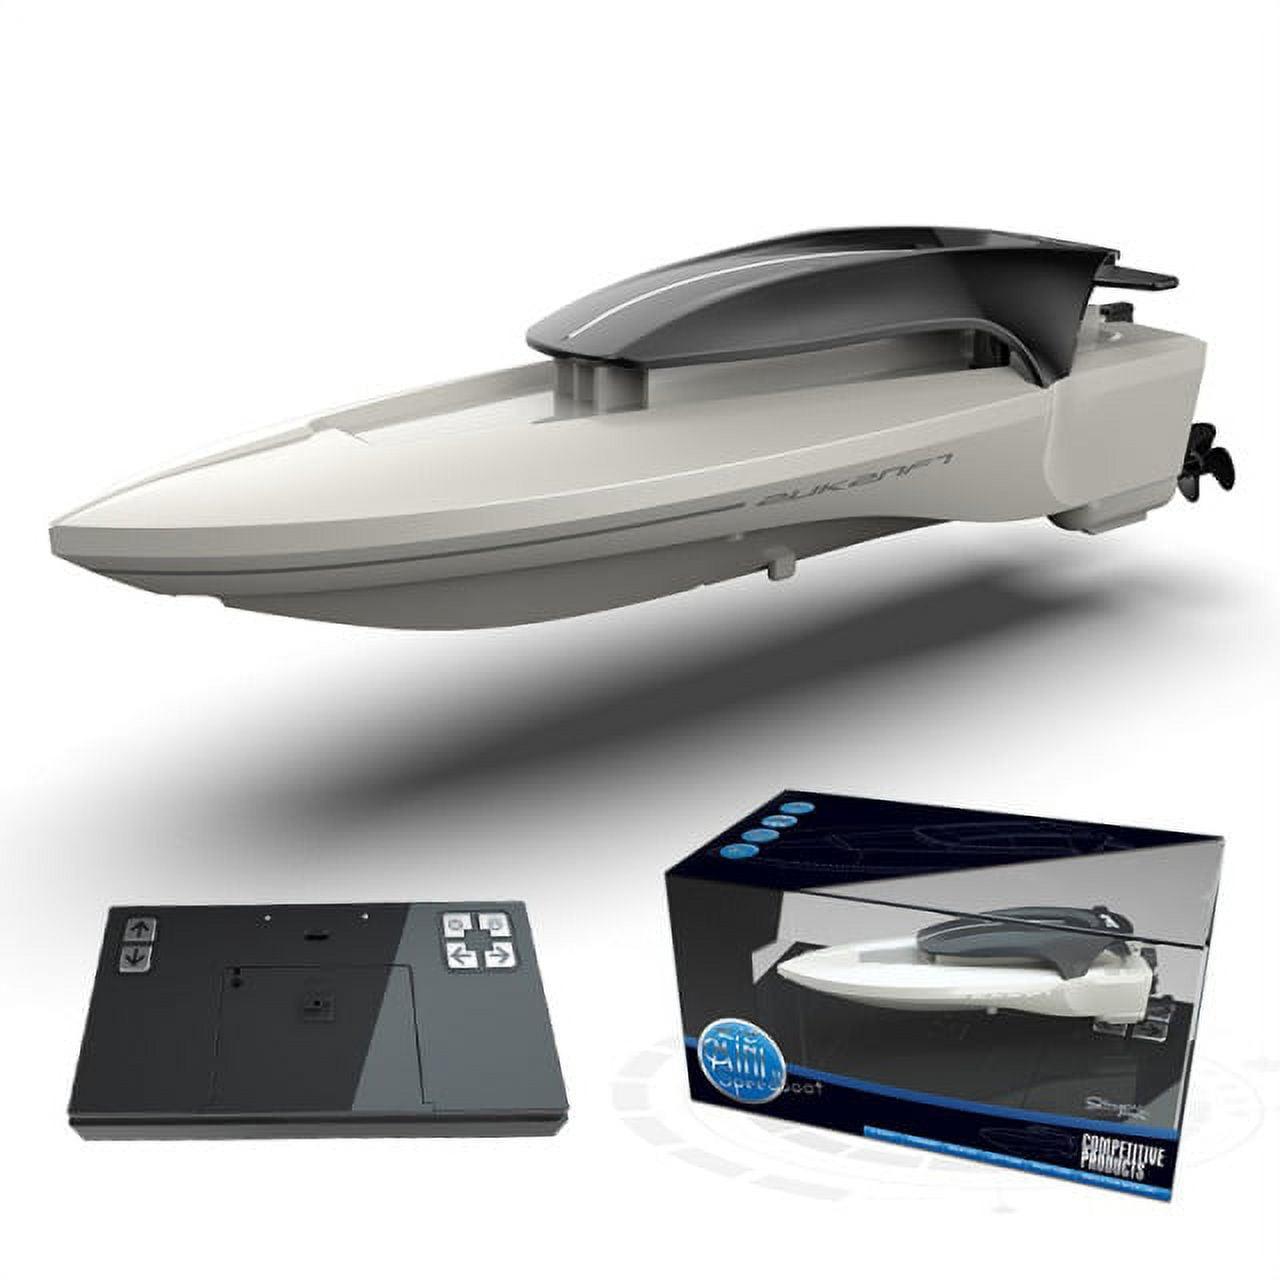 Dual Water Cooled Rc Boat: Benefits of a Dual Water Cooling System for Your RC Boat 